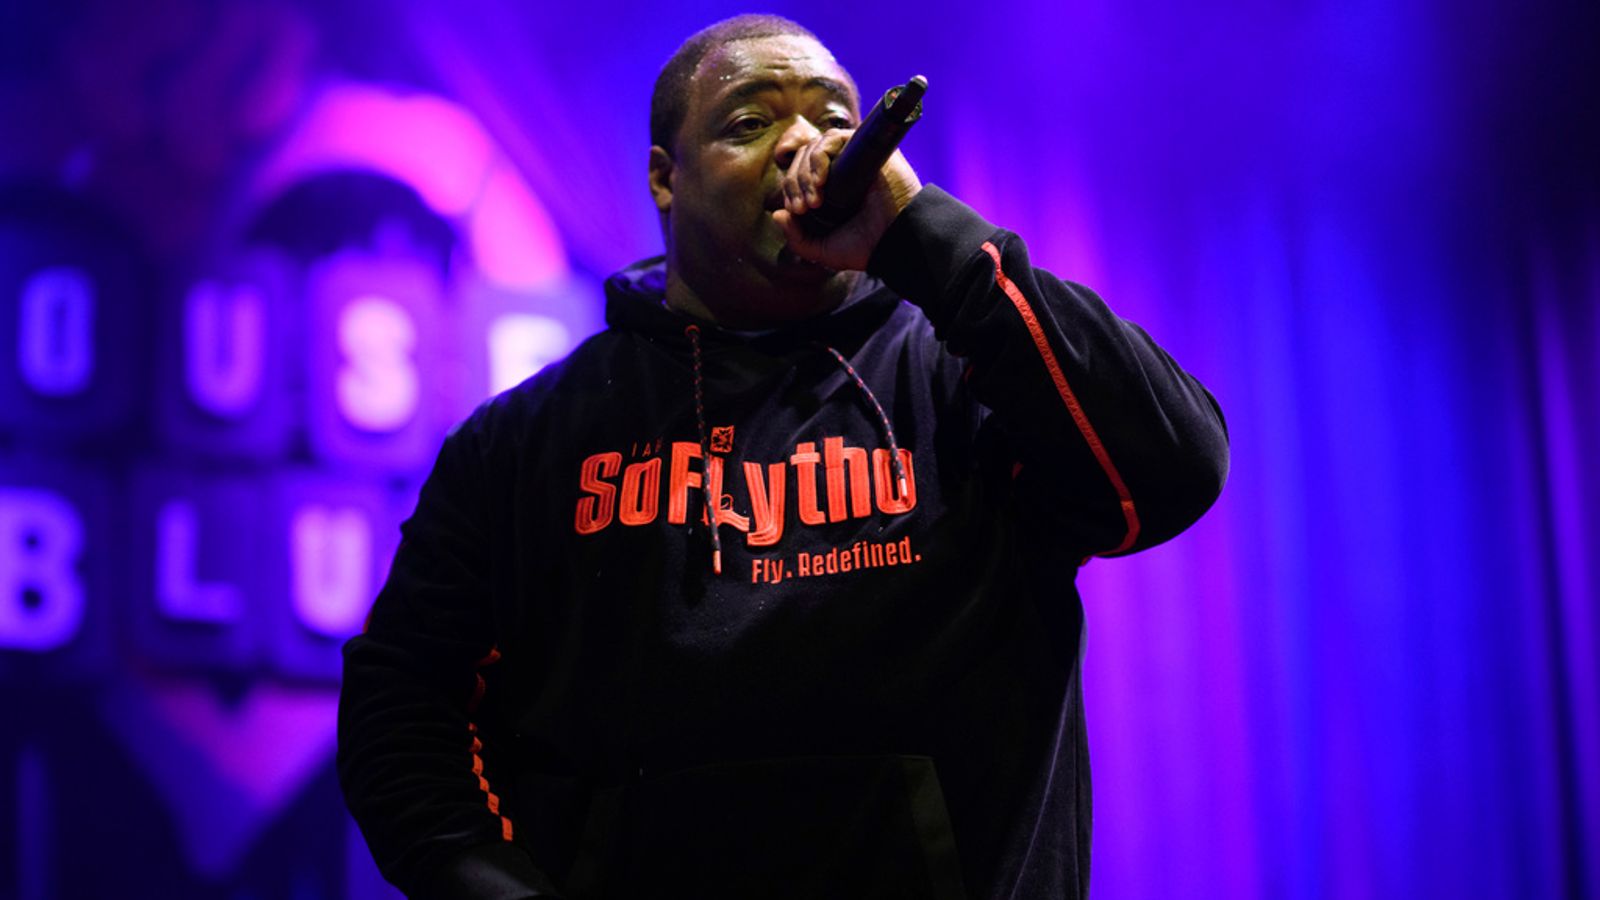 US rapper Big Pokey dies after collapsing on stage during Texas show